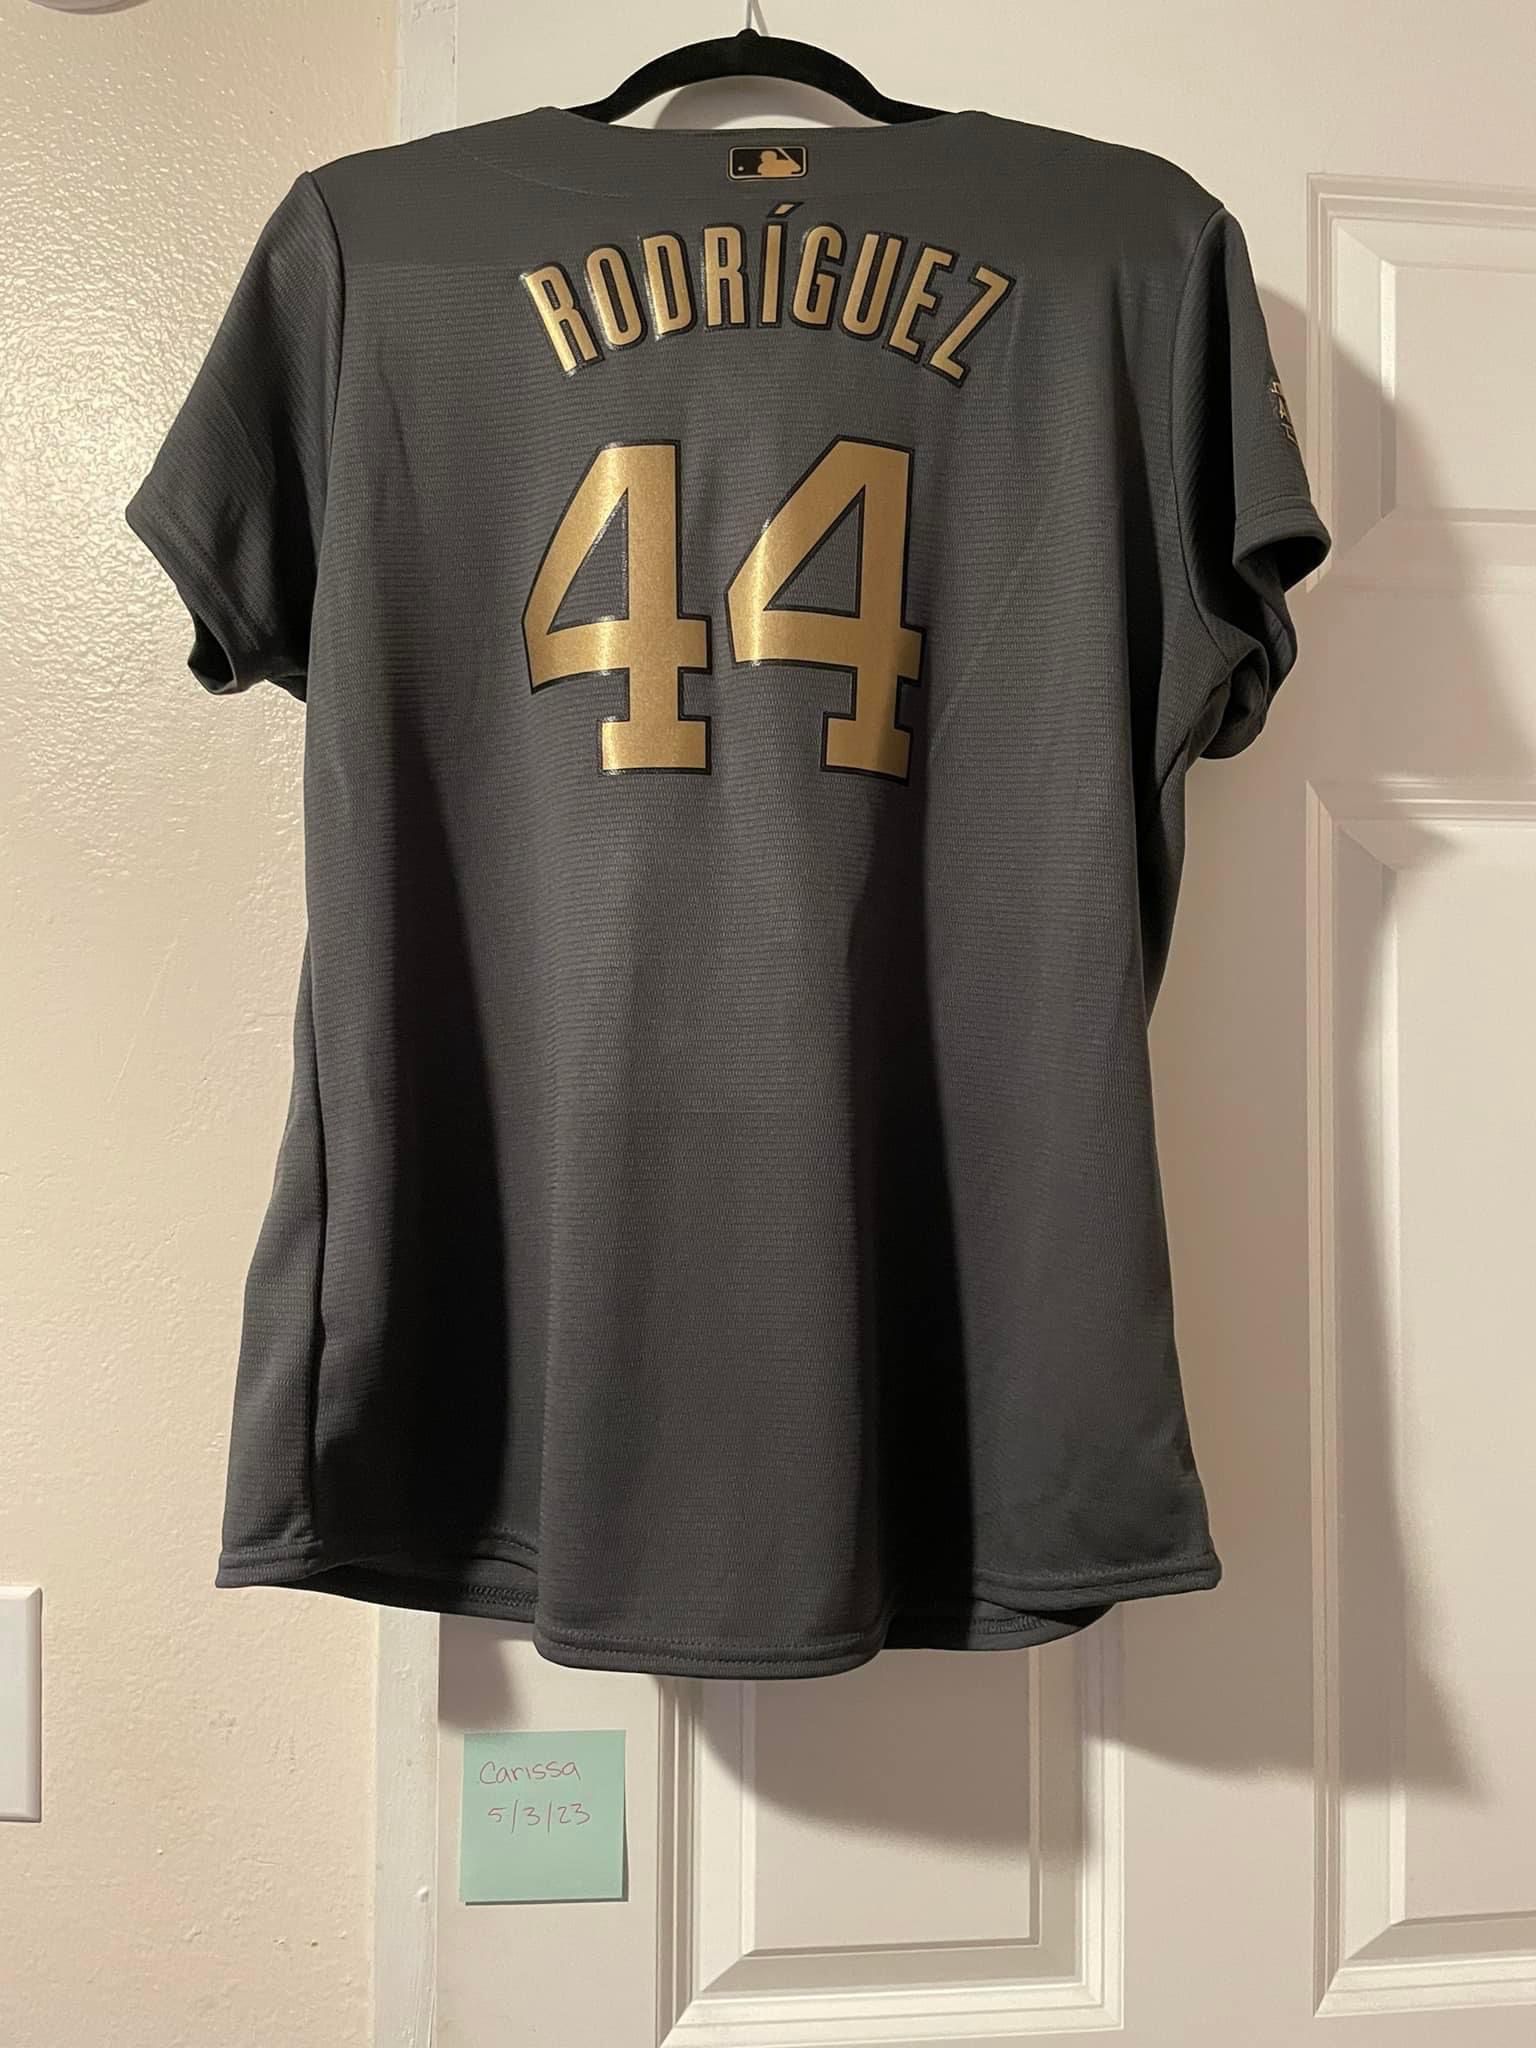 Ladies XL Julio Rodriguez All Star Jersey for Sale in Bellingham, WA -  OfferUp